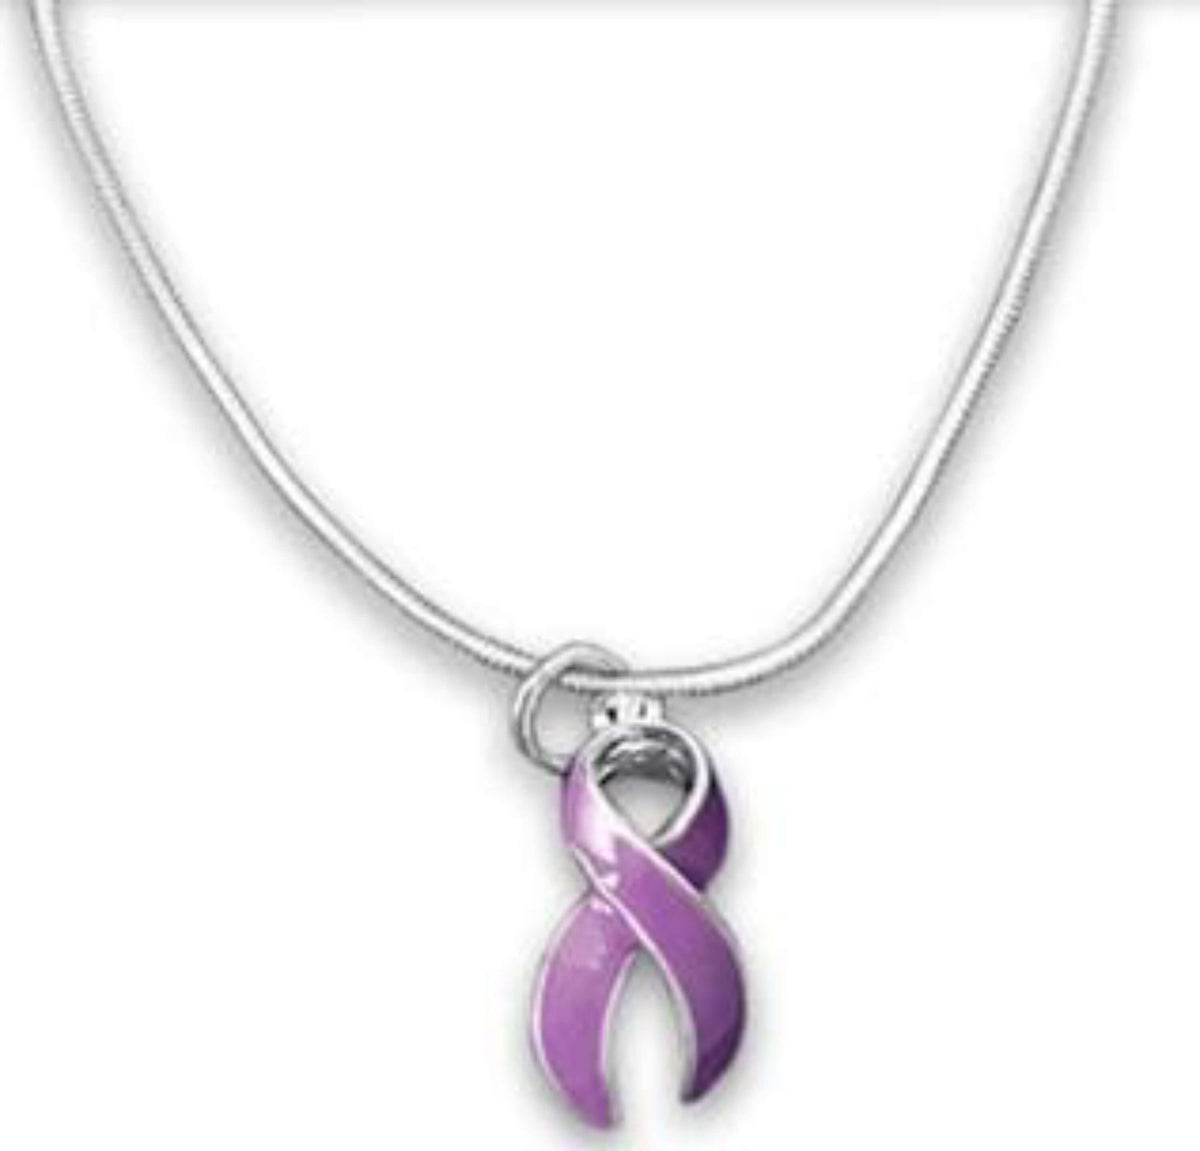 Purple Ribbon 16 or 18 Inch Necklace for all Causes - The House of Awareness